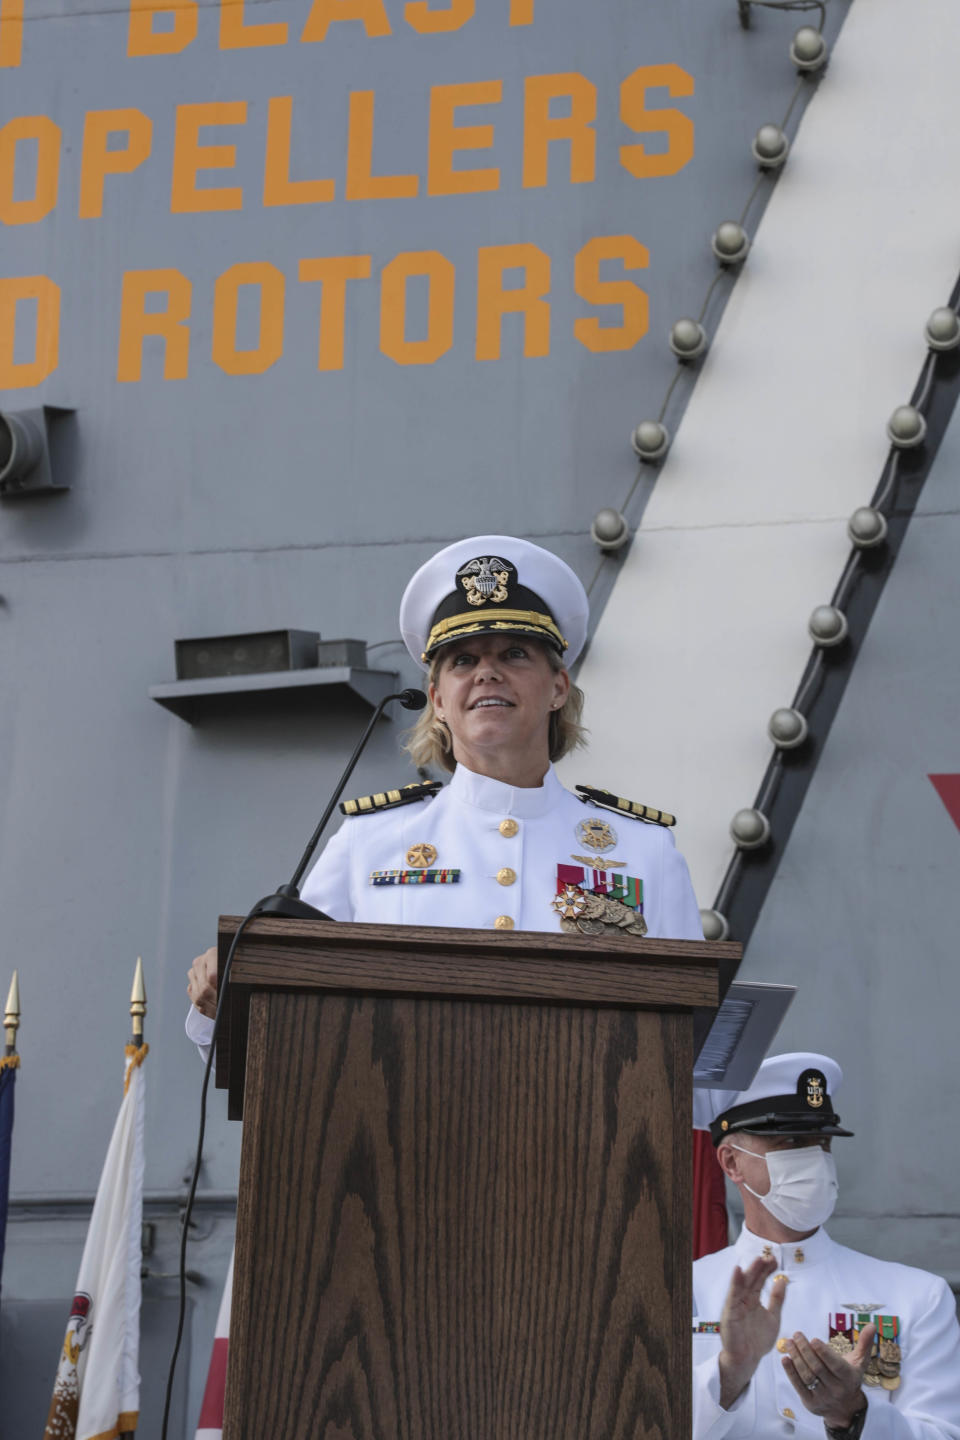 In this photo released by the U.S. Navy, Capt. Amy Bauernschmidt, newly appointed commanding officer of the aircraft carrier USS Abraham Lincoln, delivers remarks during a change of command ceremony held on the flight deck on Aug. 19, 2021. Capt. Walt "Sarge" Slaughter, right, successfully completed his 26 month tour as commanding officer during which Abraham Lincoln completed a 10-month combat deployment, the largest carrier work package ever completed in San Diego, and returned to sea in preparation for an upcoming deployment amidst the COVID-19 pandemic. Slaughter was relieved by Capt. Amy Bauernschmidt. The USS Abraham Lincoln deployed Monday, Jan. 3, 2022, from San Diego under the command of Capt. Amy Bauernschmidt, the first woman to lead a nuclear carrier in U.S. Navy history. (Mass Communication Spc. 3rd Class Jeremiah Bartelt/U.S. Navy via AP)